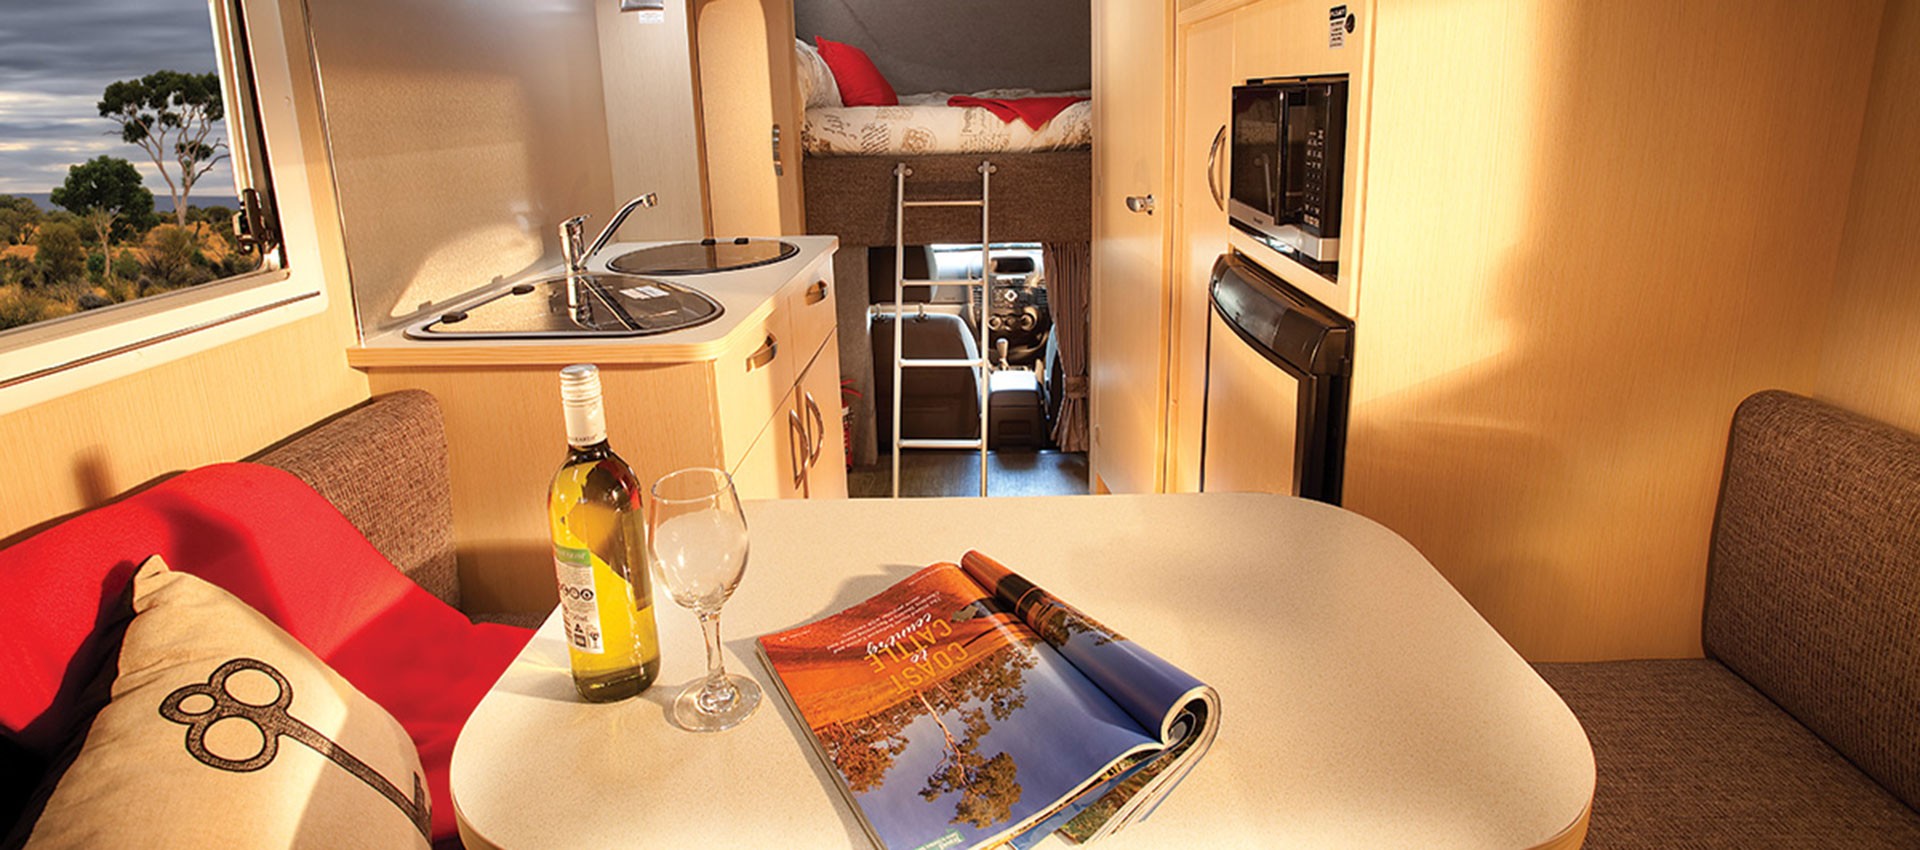 A small motorhome with options